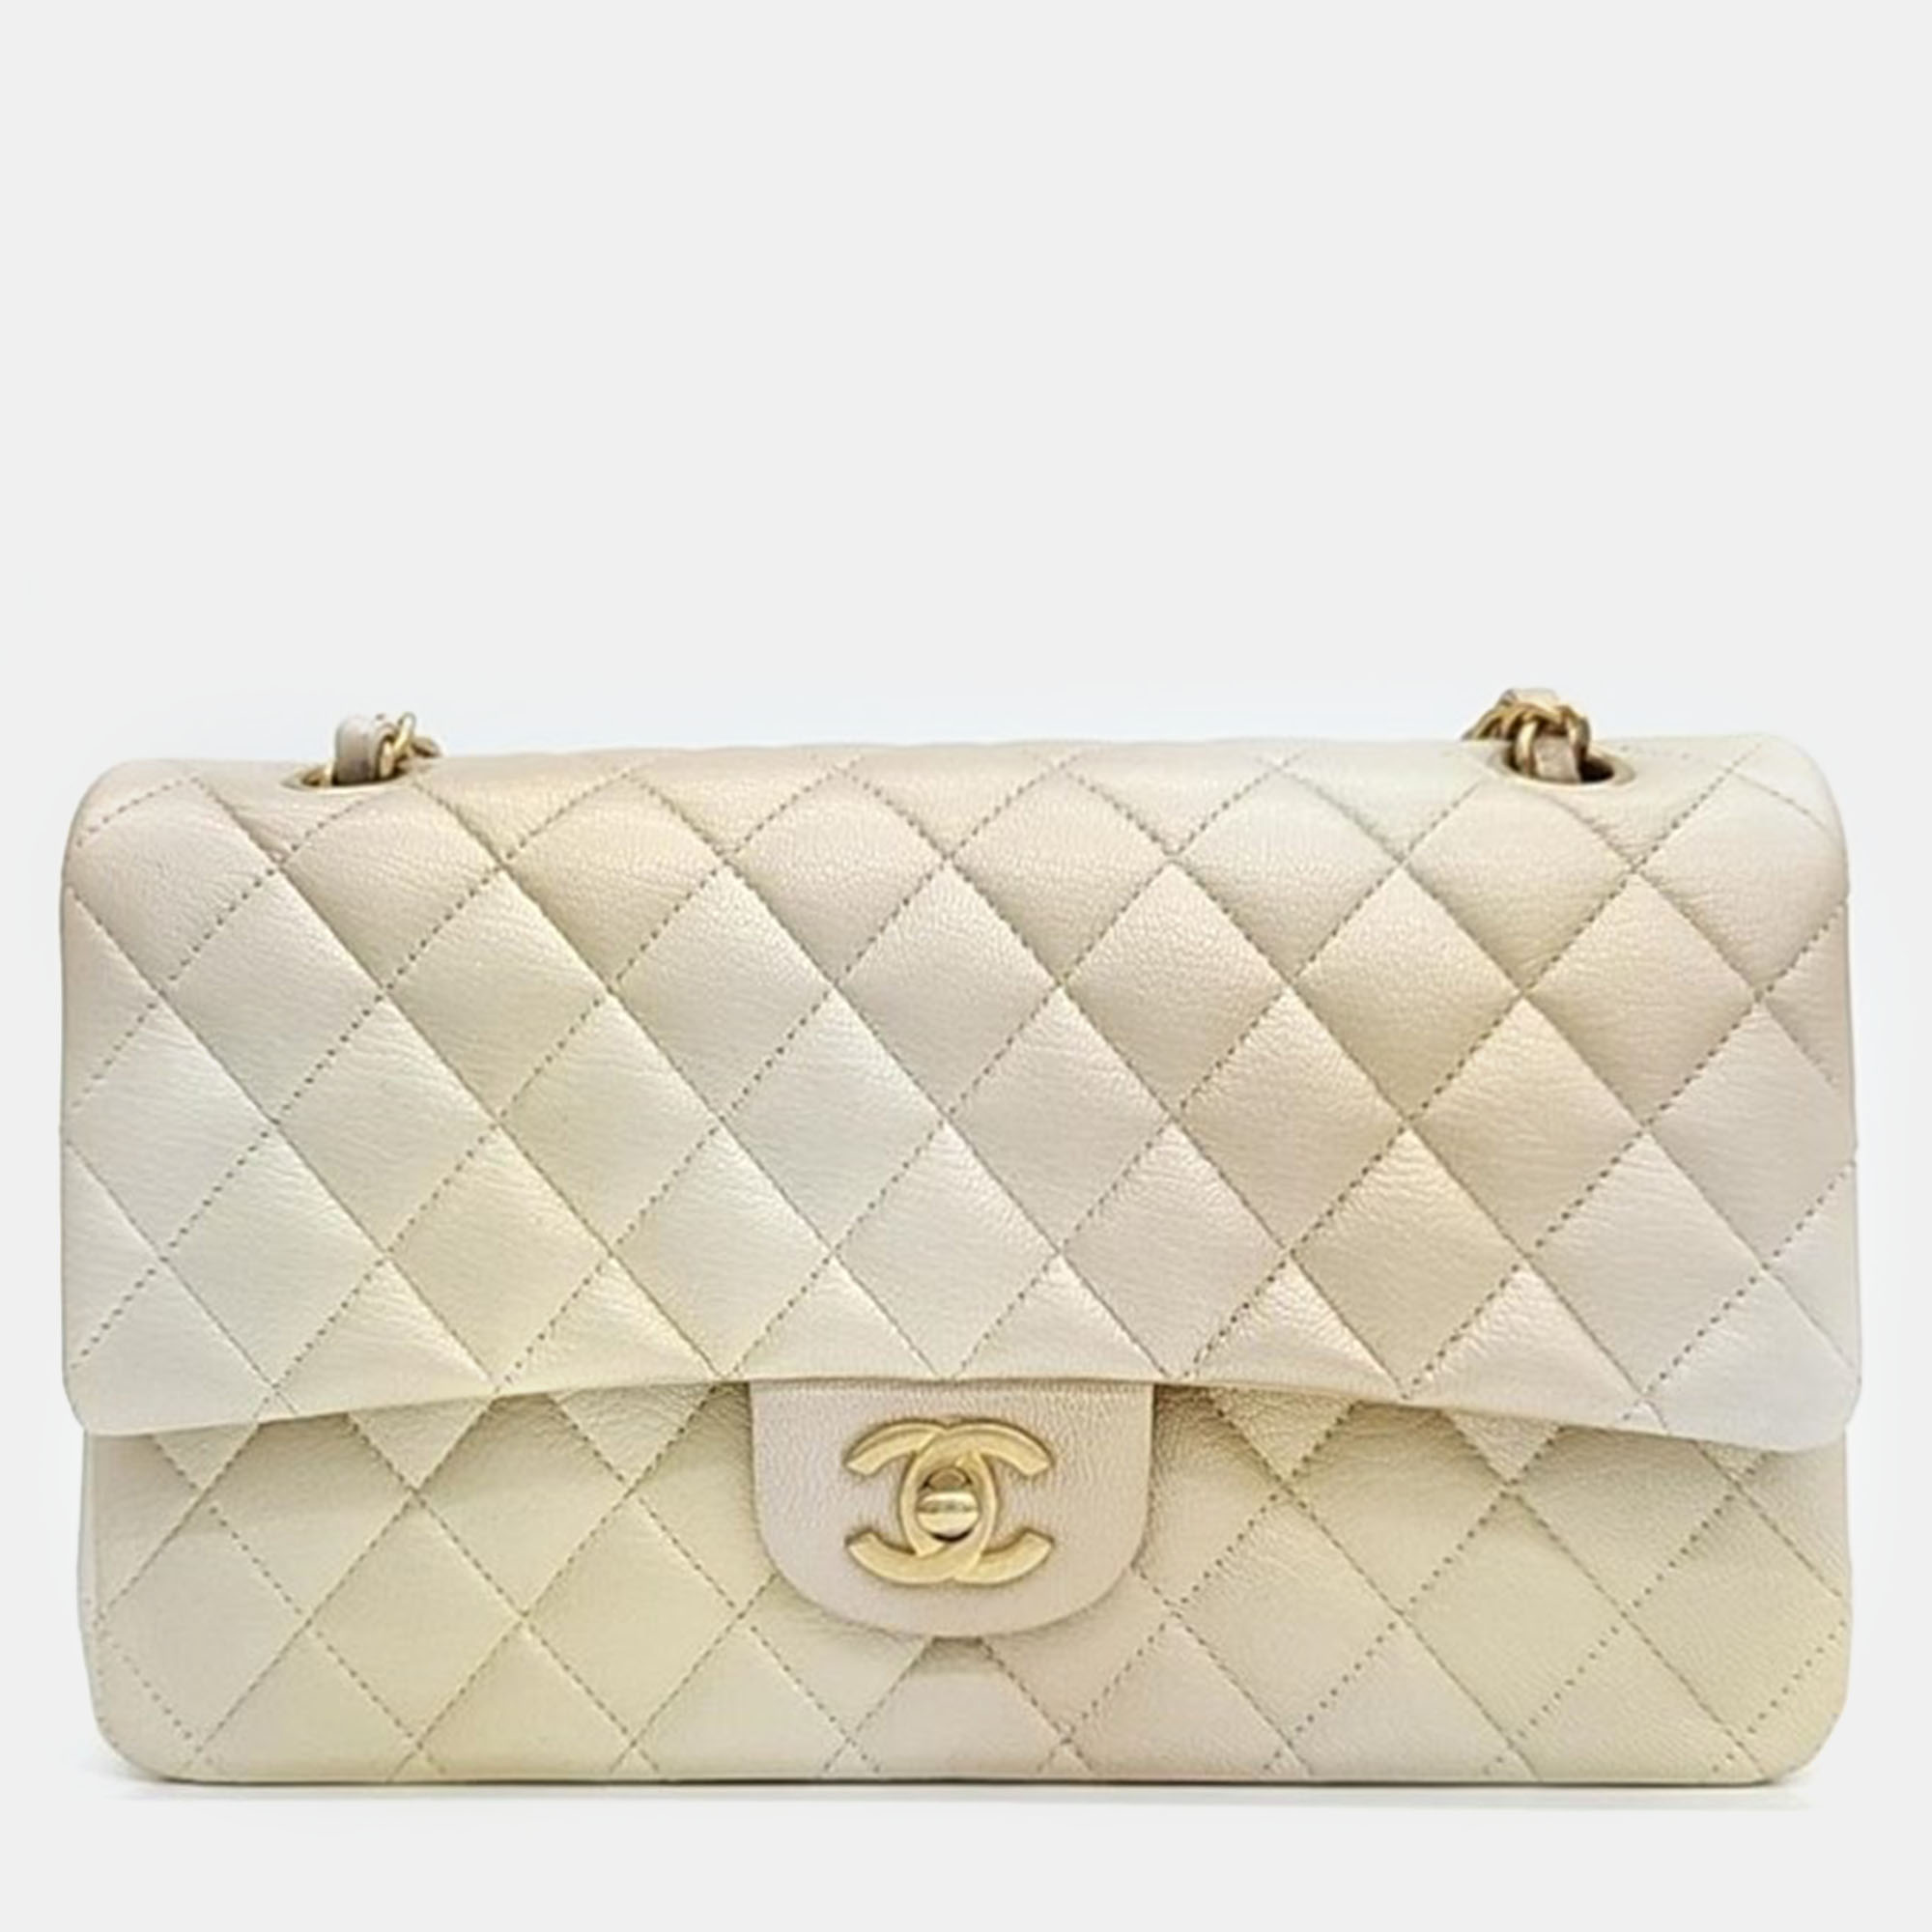 Chanel gold leather classic double flap medium bag